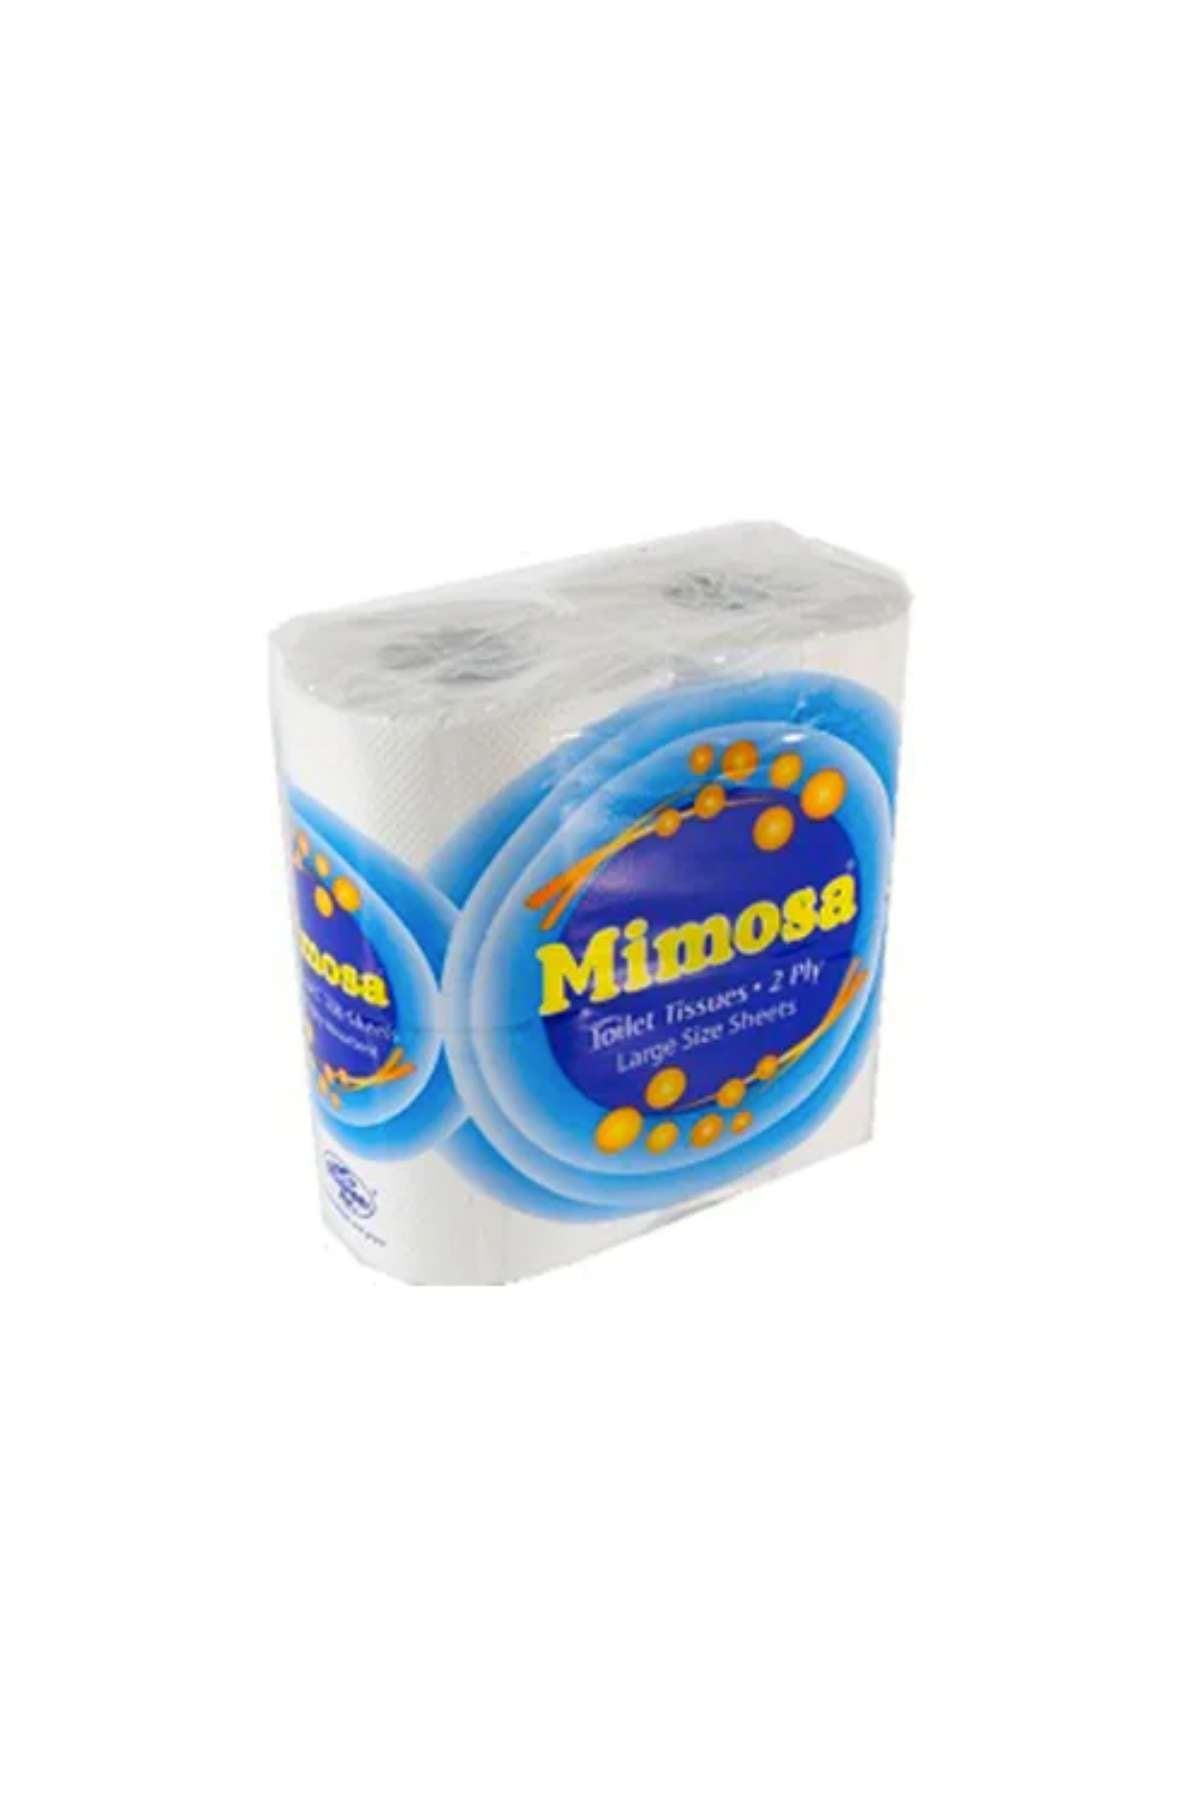 Mimosa Toilet Tissues Large Size Sheets 10200500